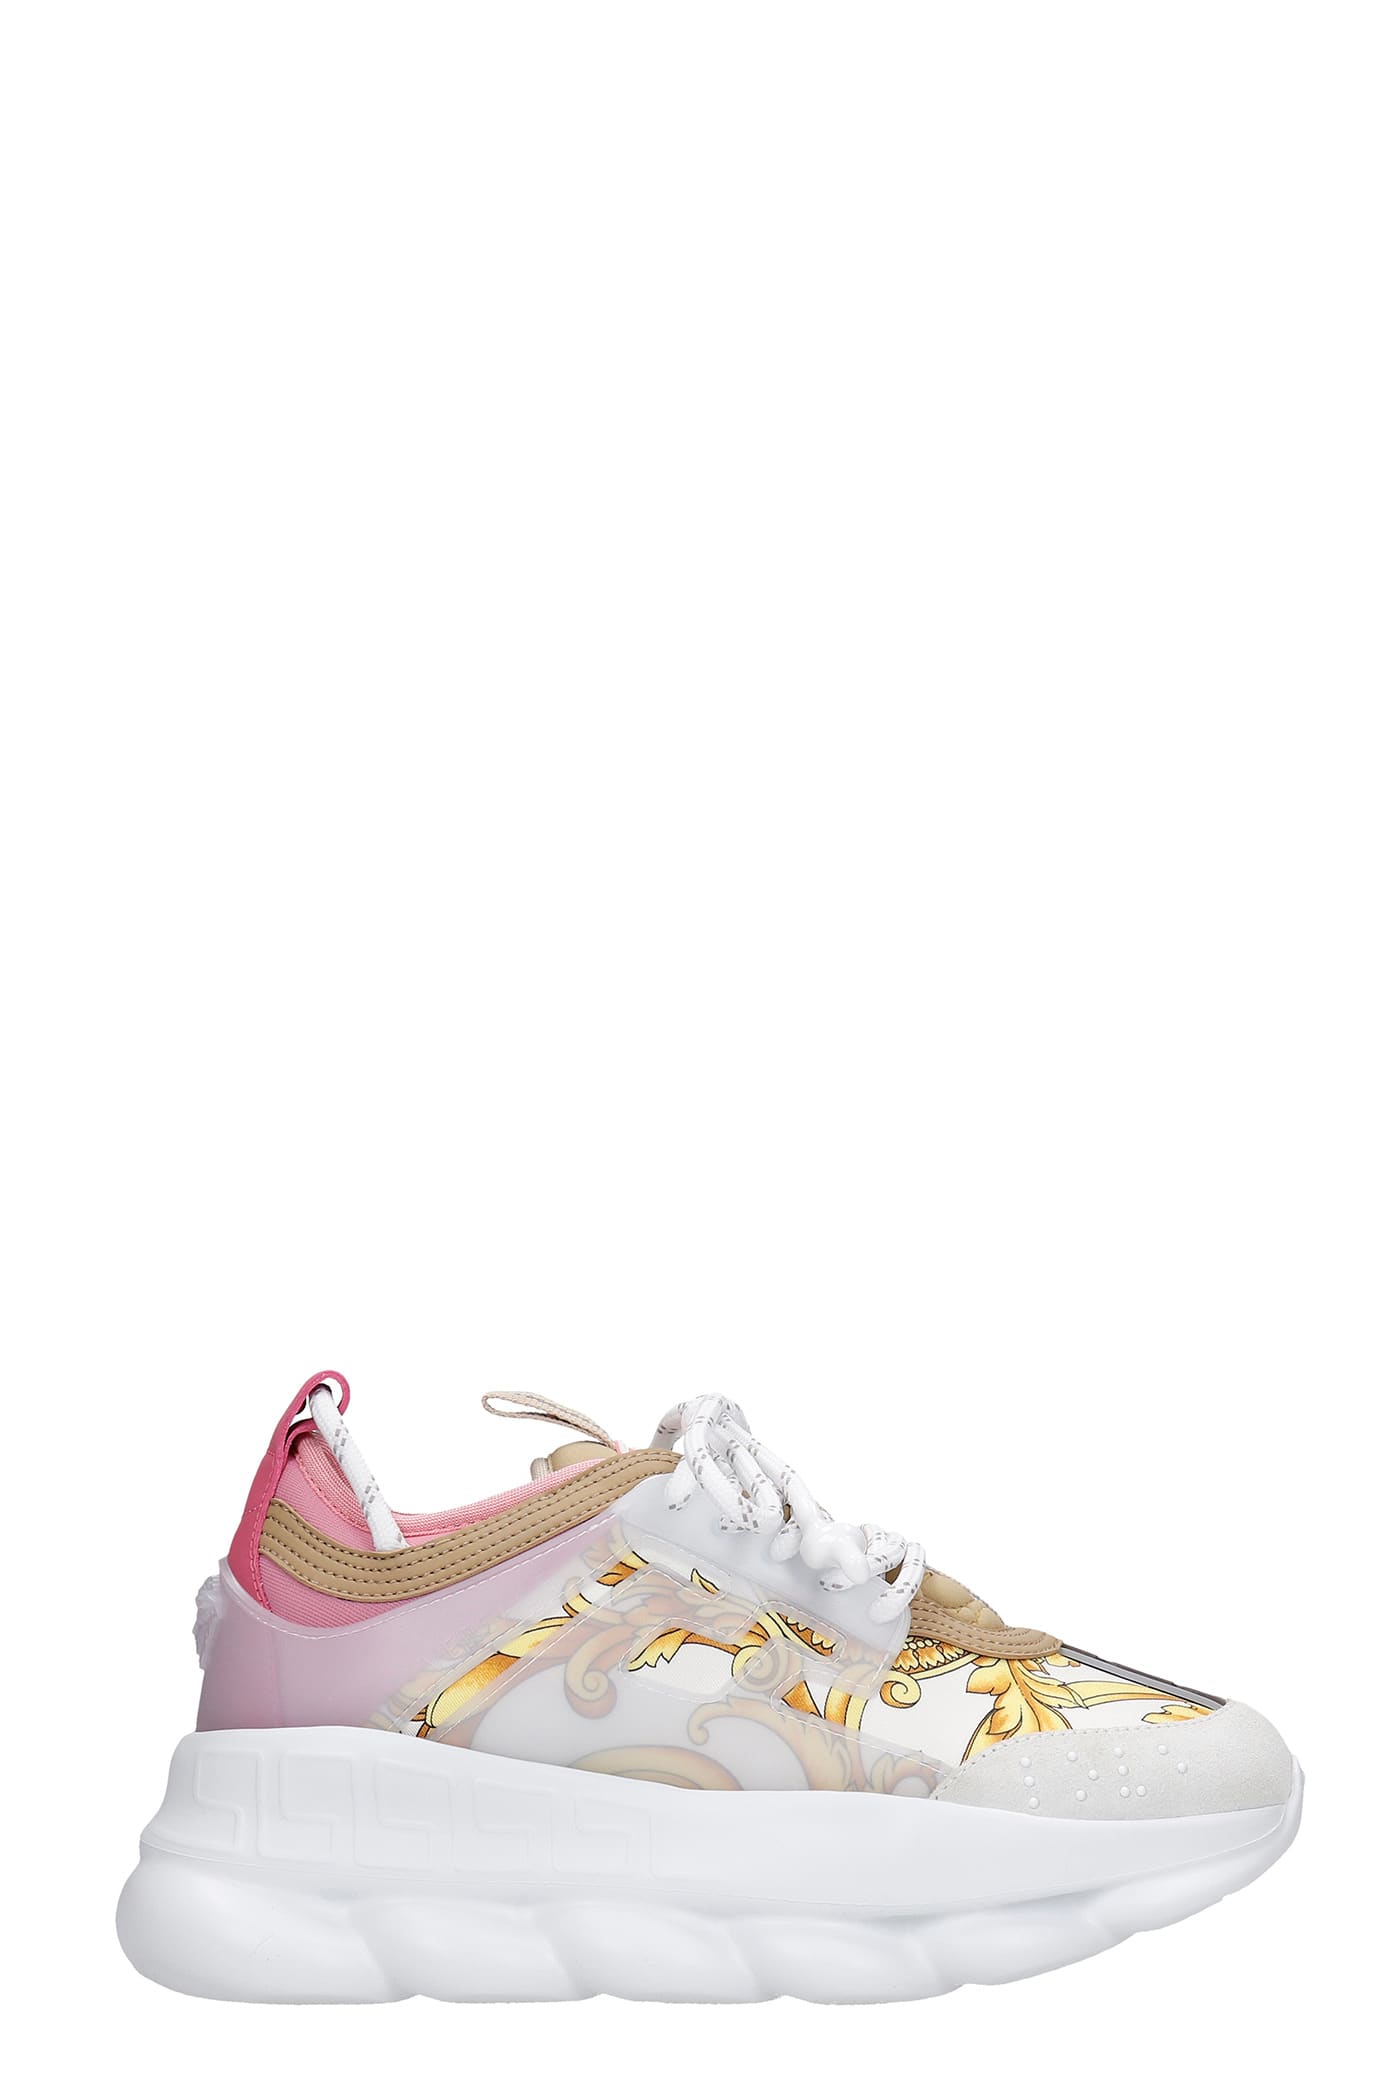 Buy Versace Chain React Sneakers In White Synthetic Fibers online, shop Versace shoes with free shipping